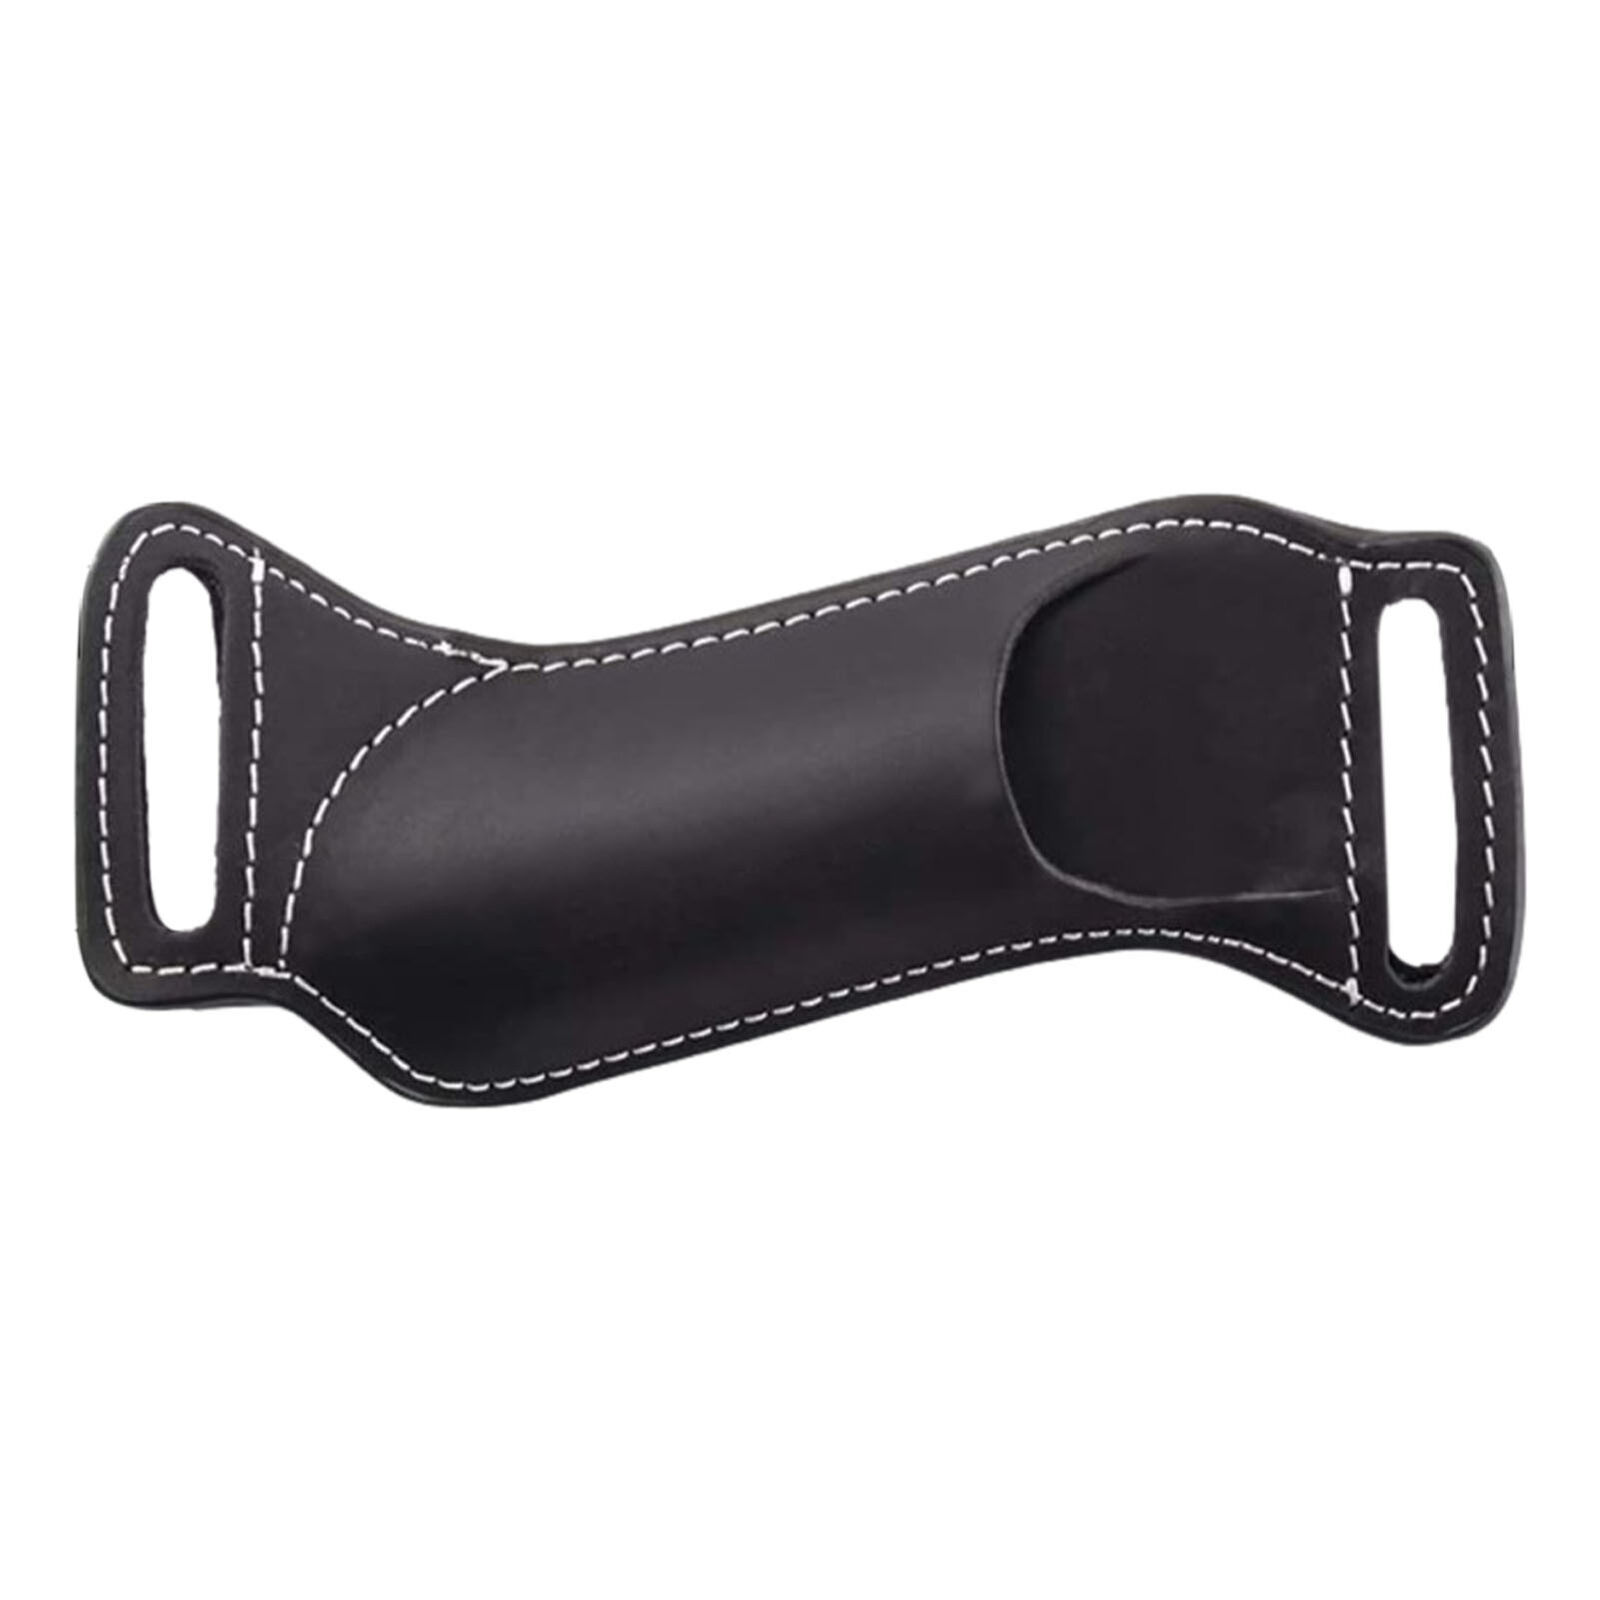 PU Leather Sheath Folding Tool Knife Holder Pouch Case With Belt Loop